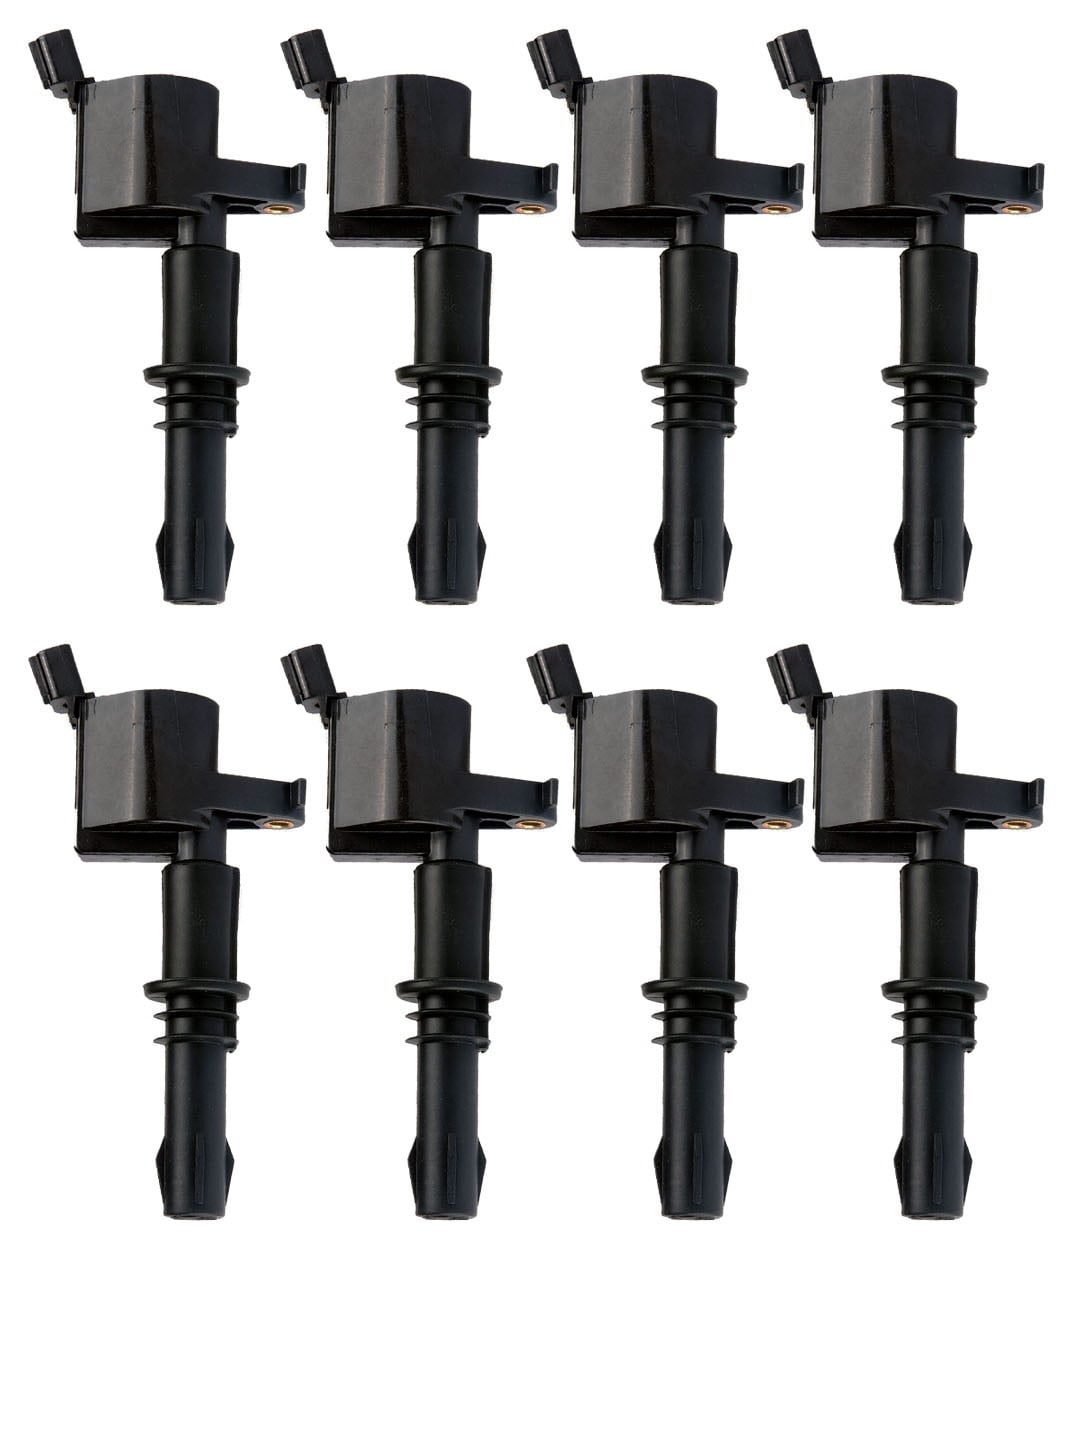 ENA Set of 8 Ignition Coil Pack Compatible with Ford Mustang Lincoln Navigator Continental Mark VIII Aviator Panoz 4.6L 5.4L V8 Replacement for DG512 UF191 C1141 